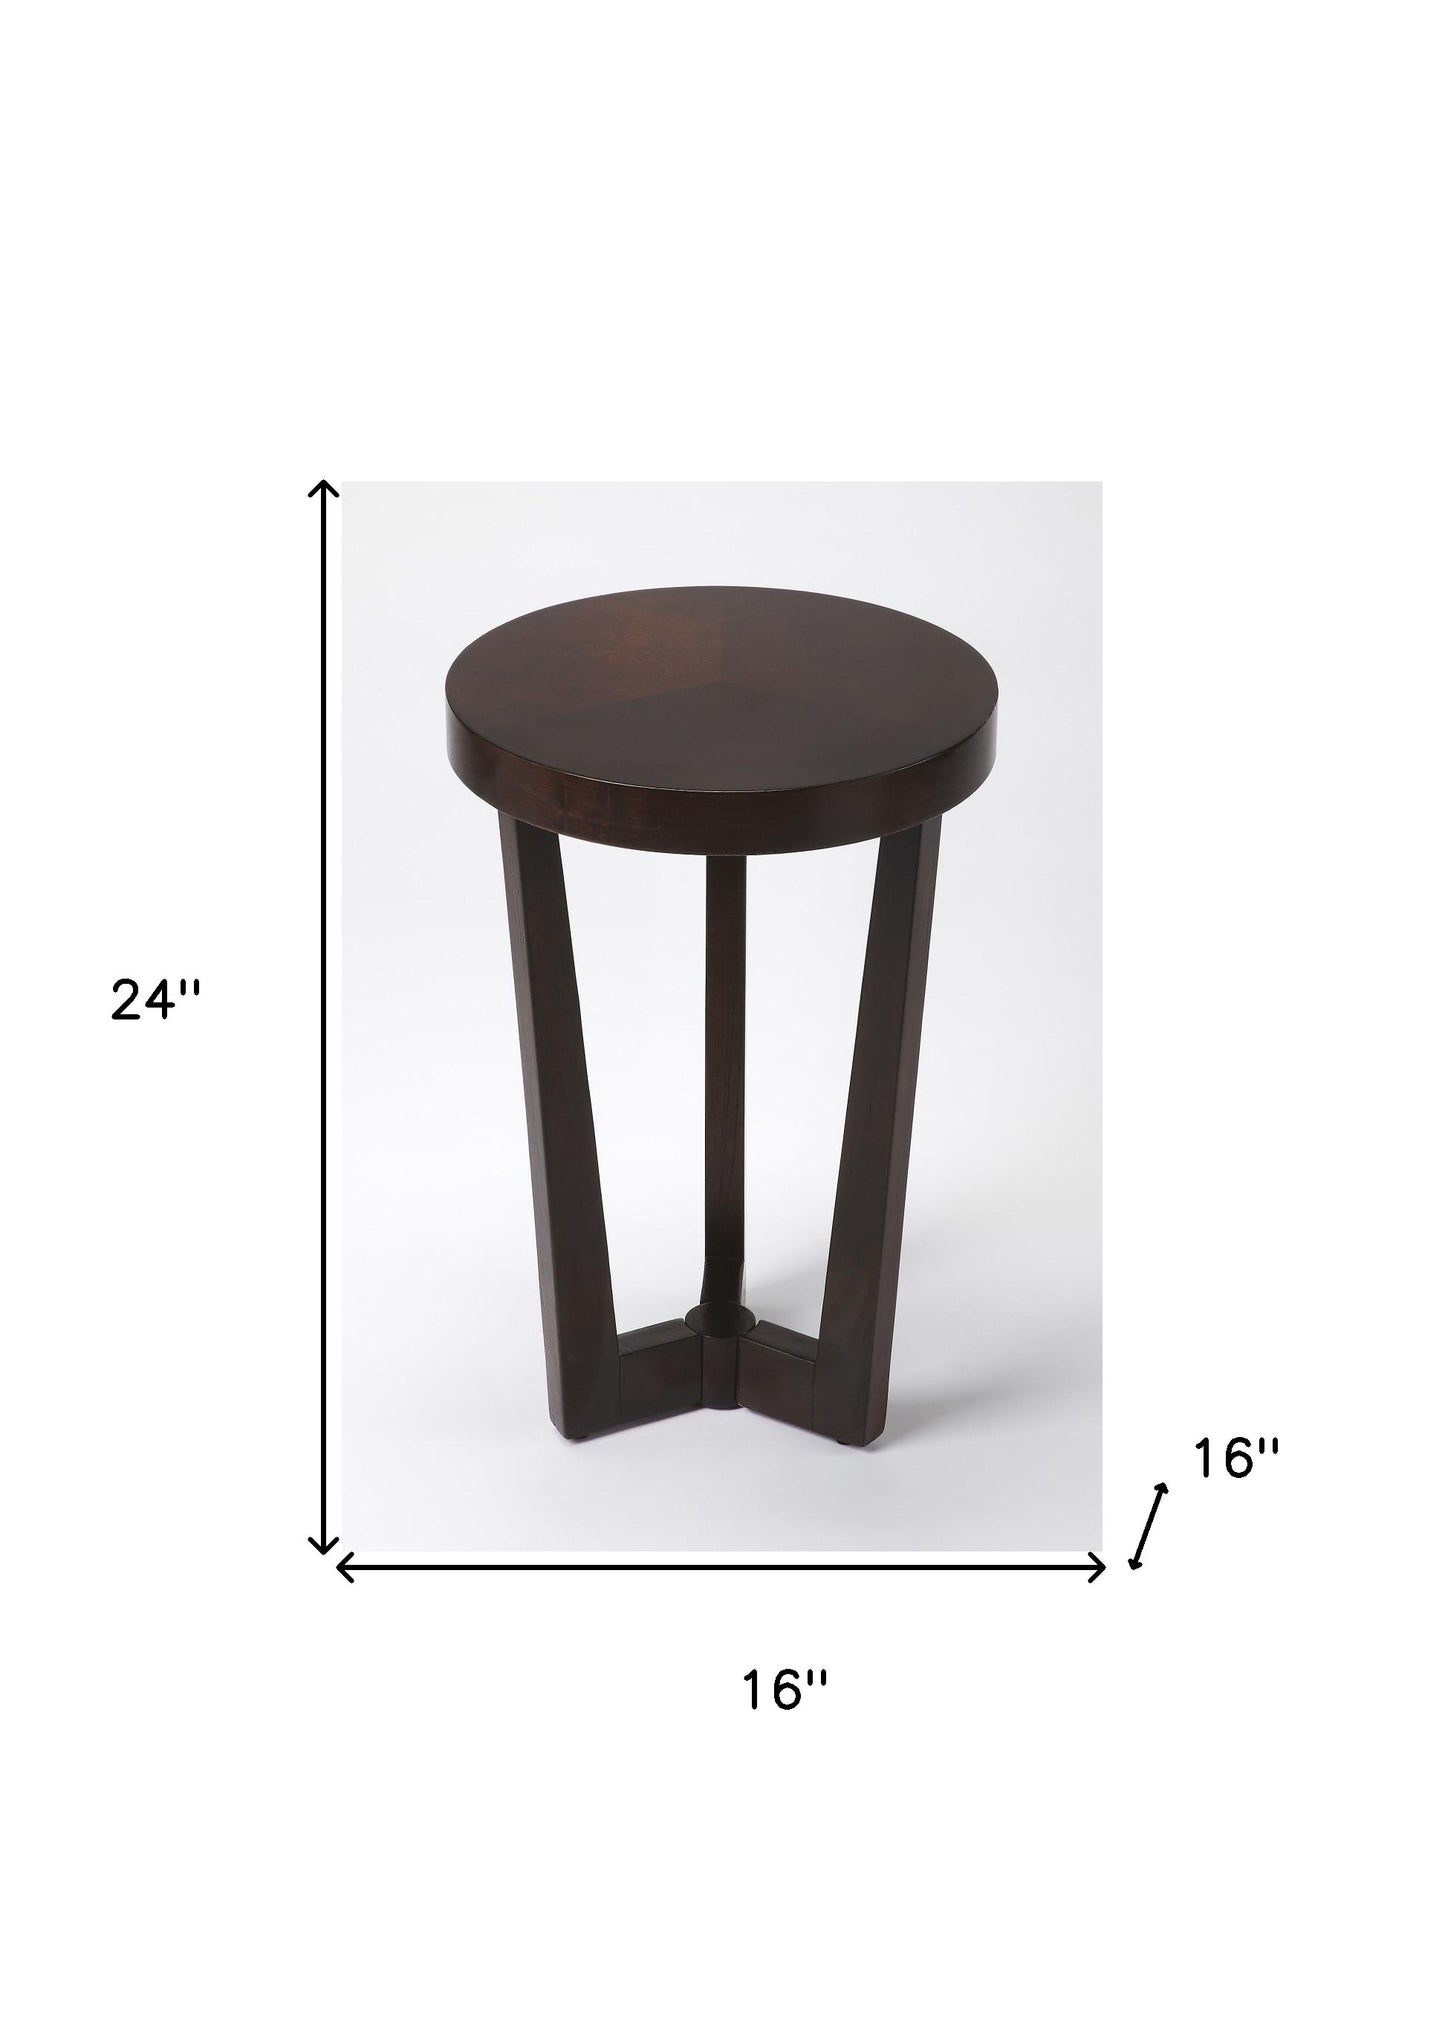 24" Merlot Three Leg Round End Table By Homeroots